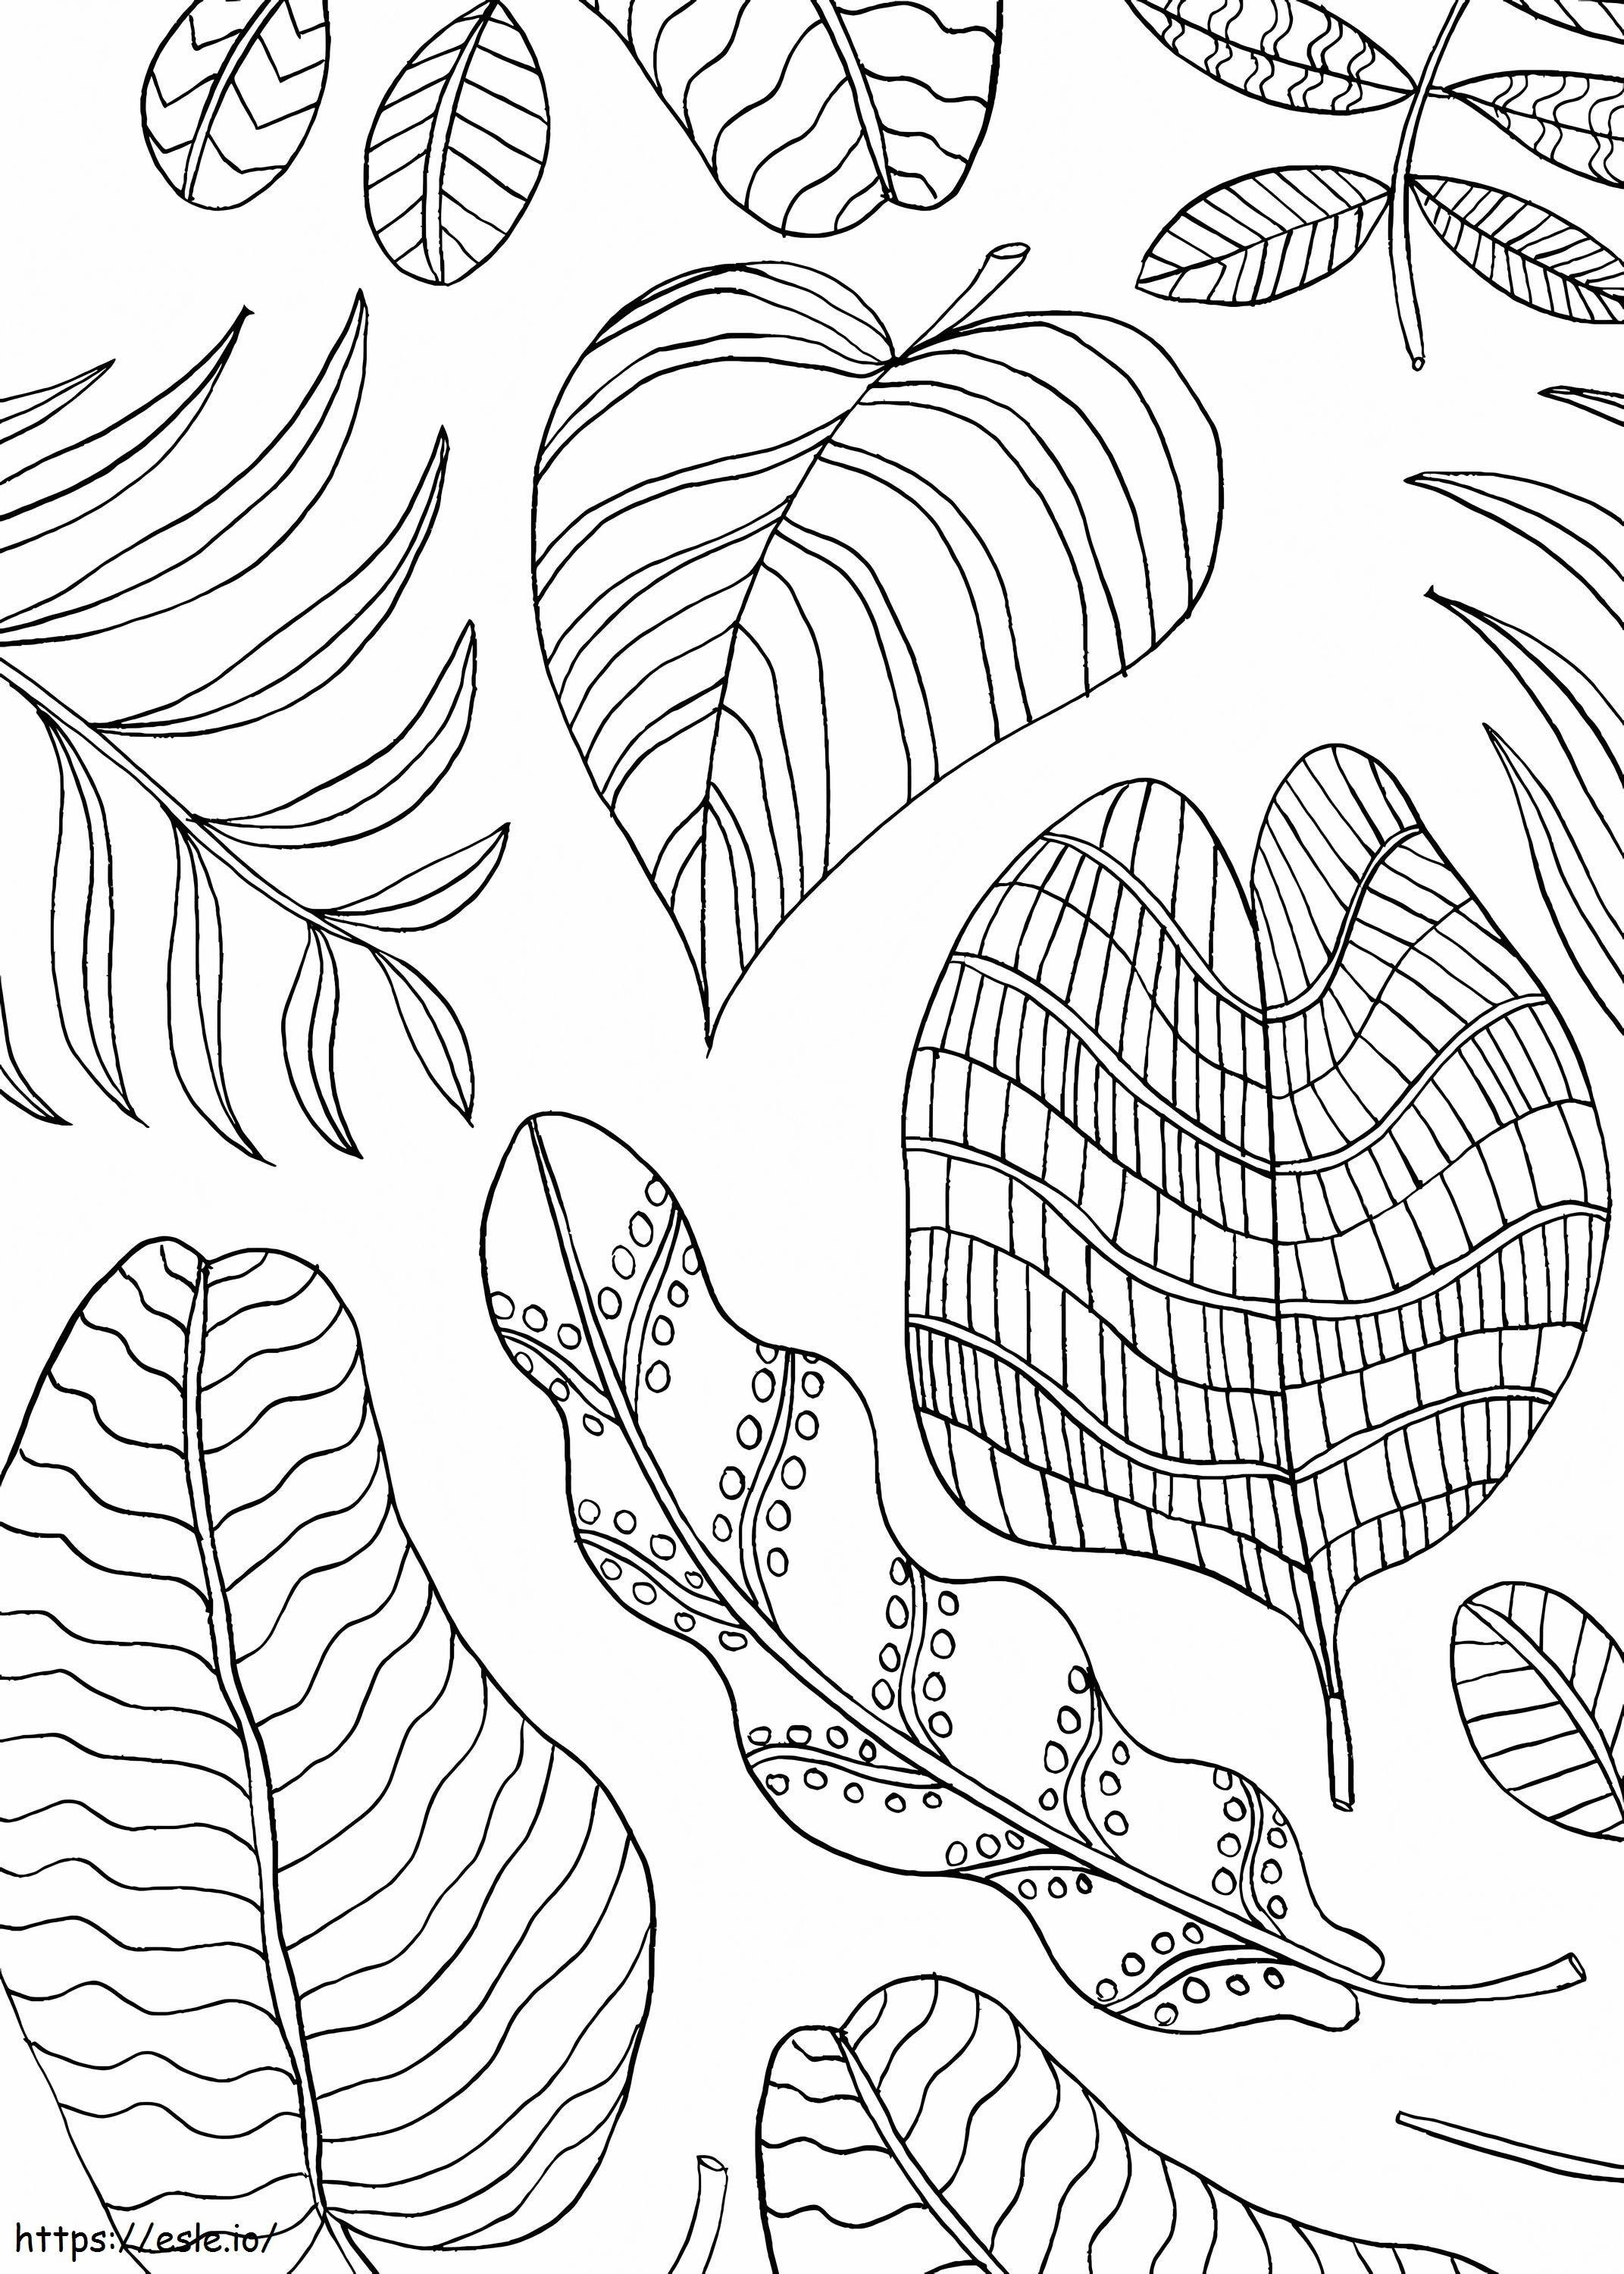 Nature Leaf Mindfulness coloring page